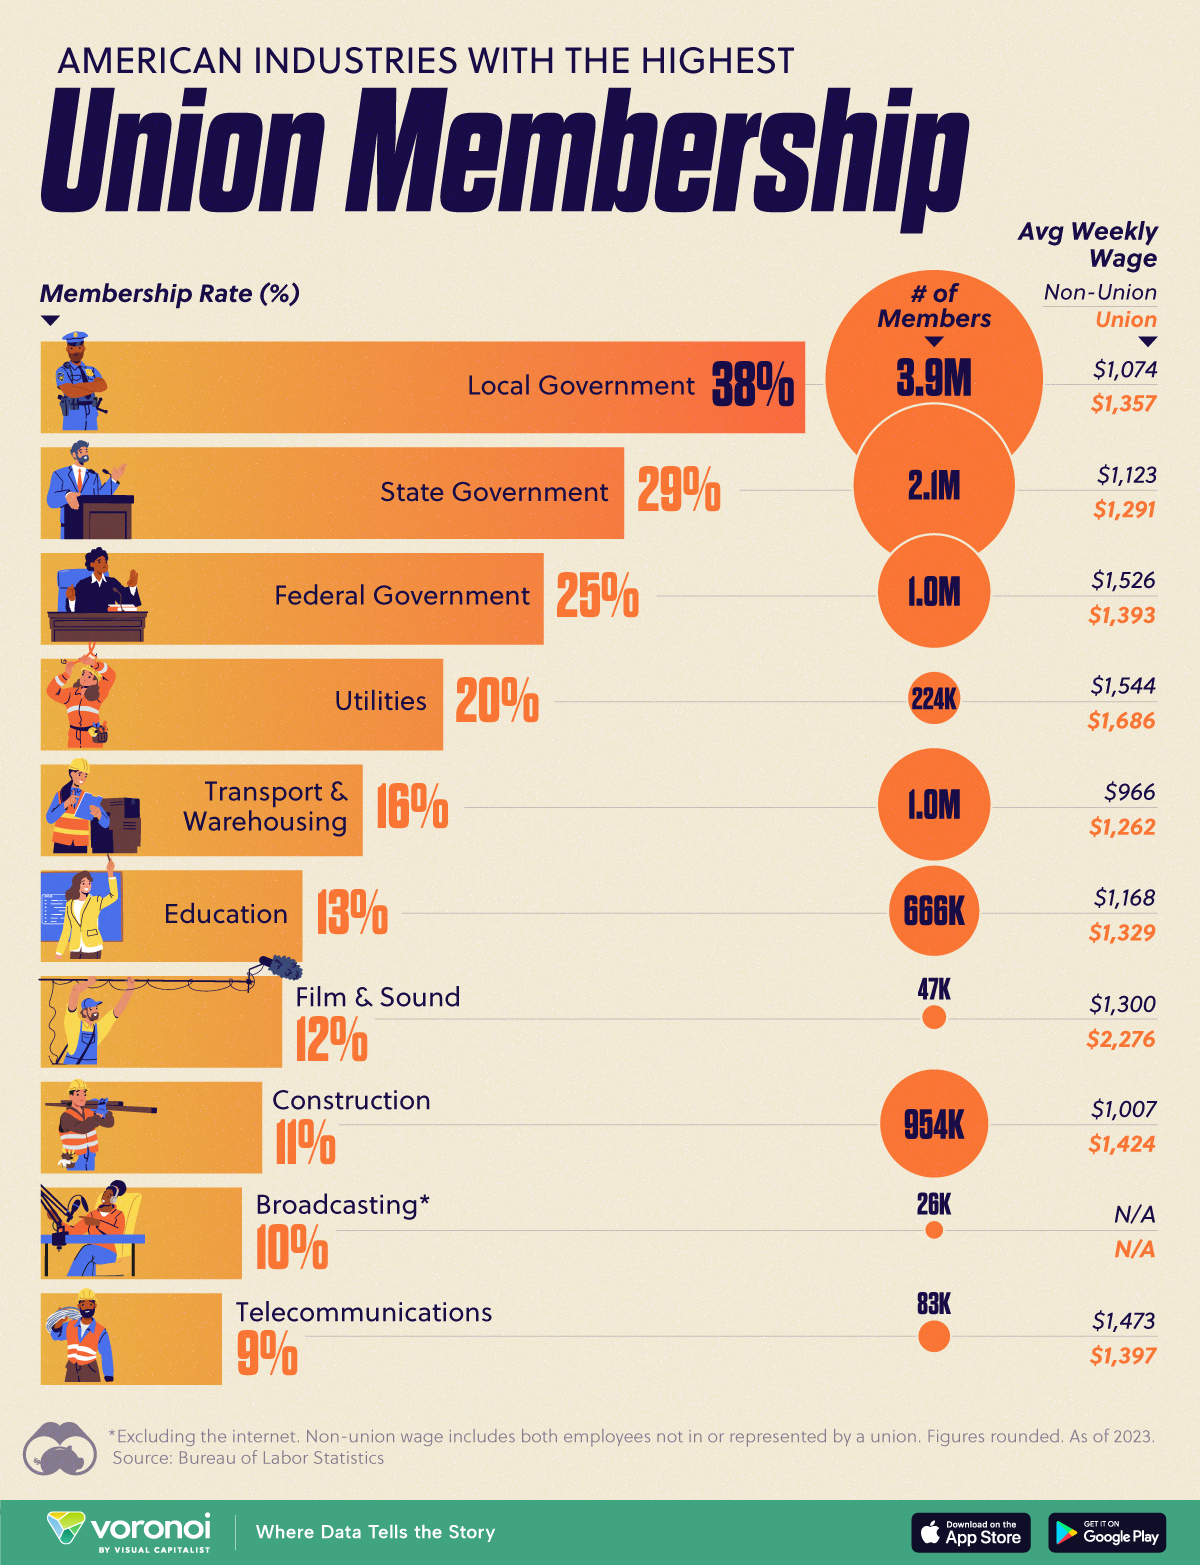 This chart shows the union membership rate of those employed per industry in America, sourced from the Bureau of Labor Statistics (2023).